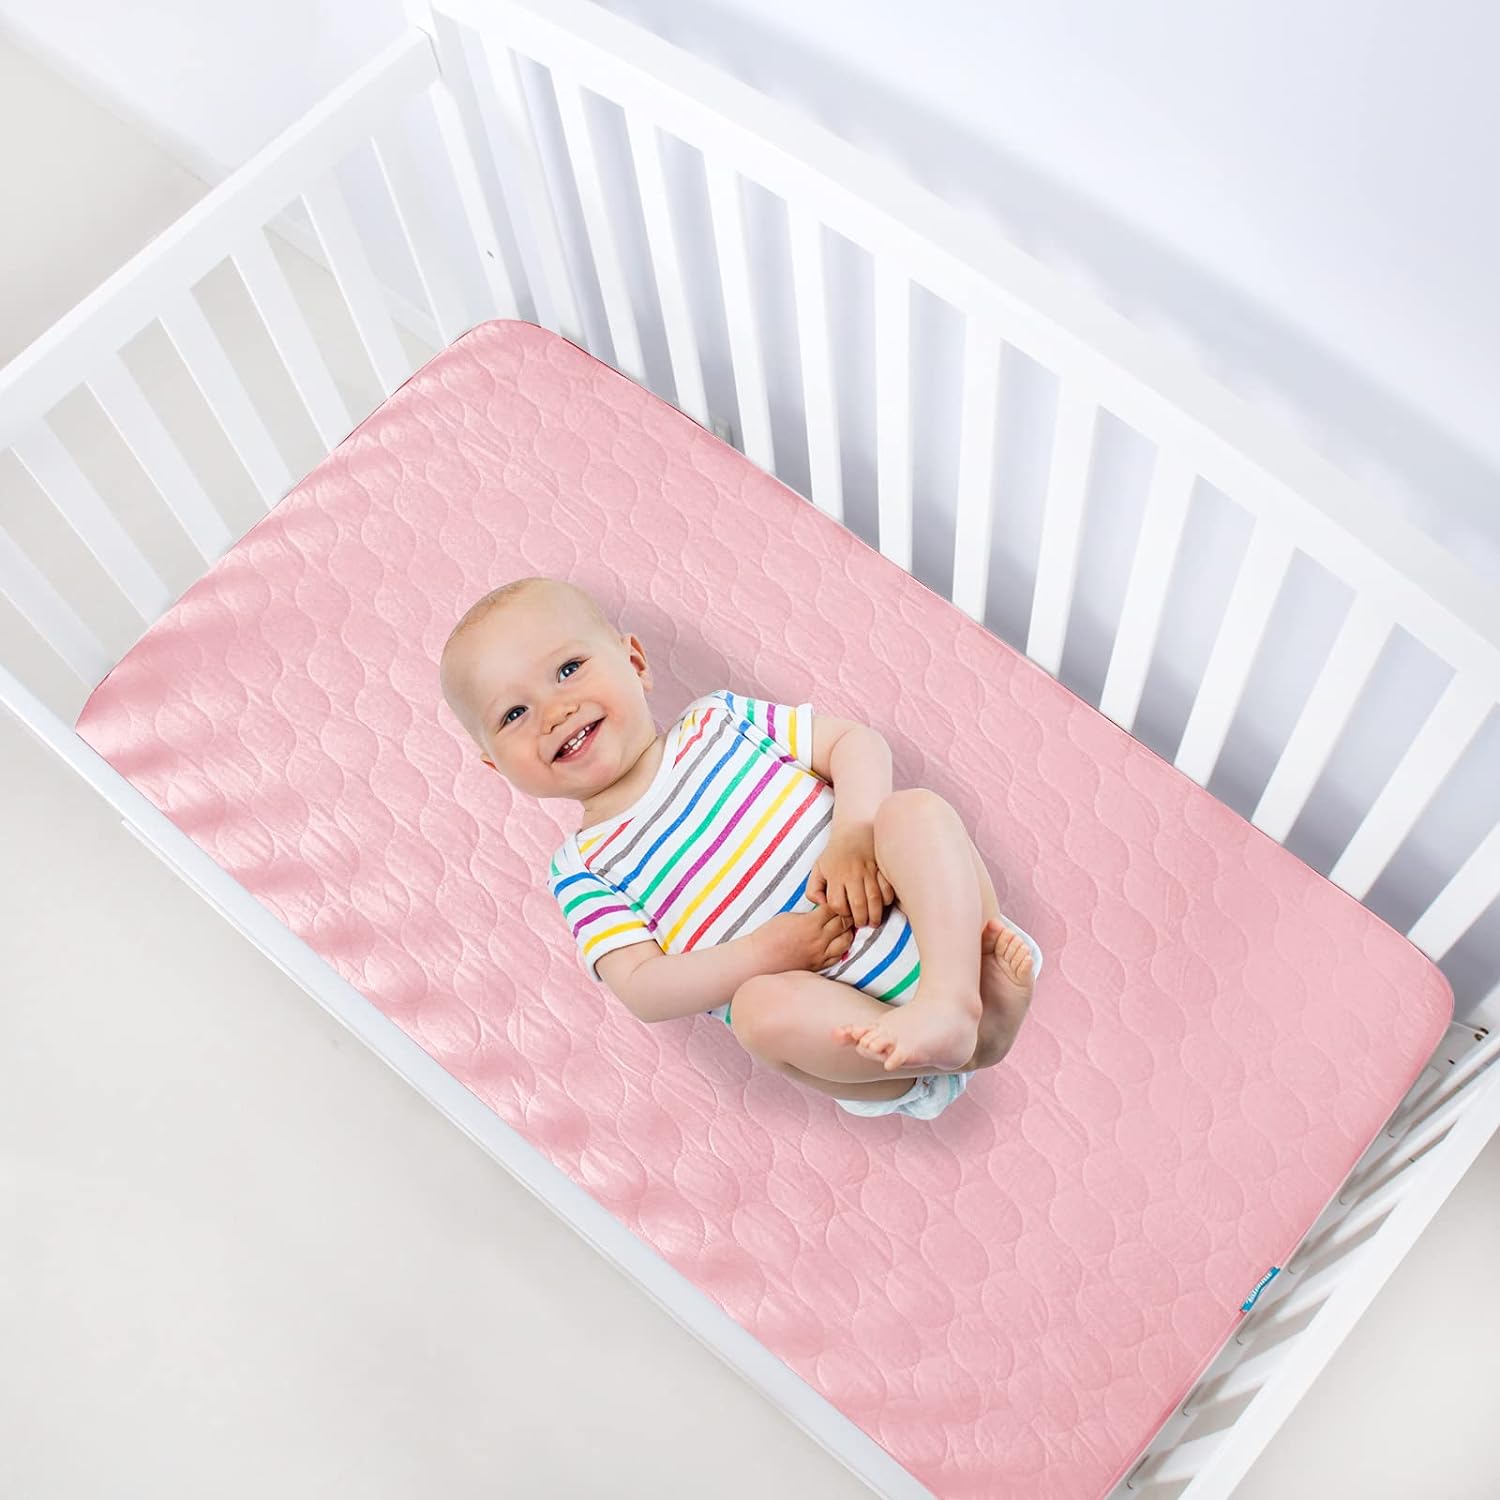 Crib Mattress Protector/ Pad Cover - Quilted Microfiber, Waterproof (for Standard Crib/ Toddler Bed), Pink - Biloban Online Store